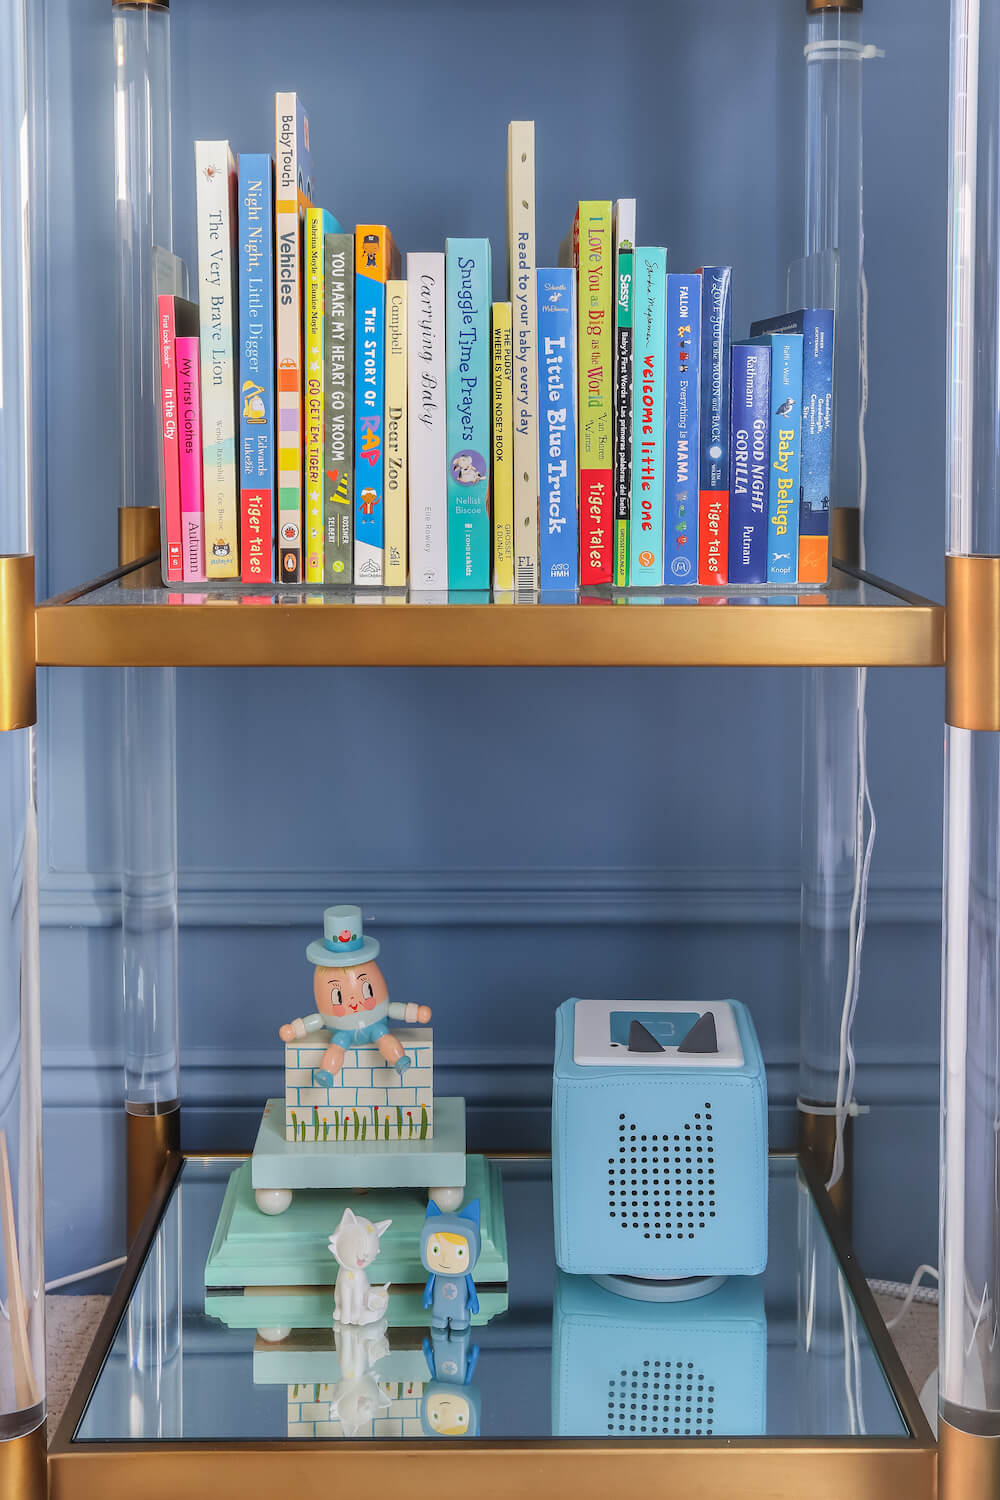 acrylic and gold shelves with baby board books and Tonies